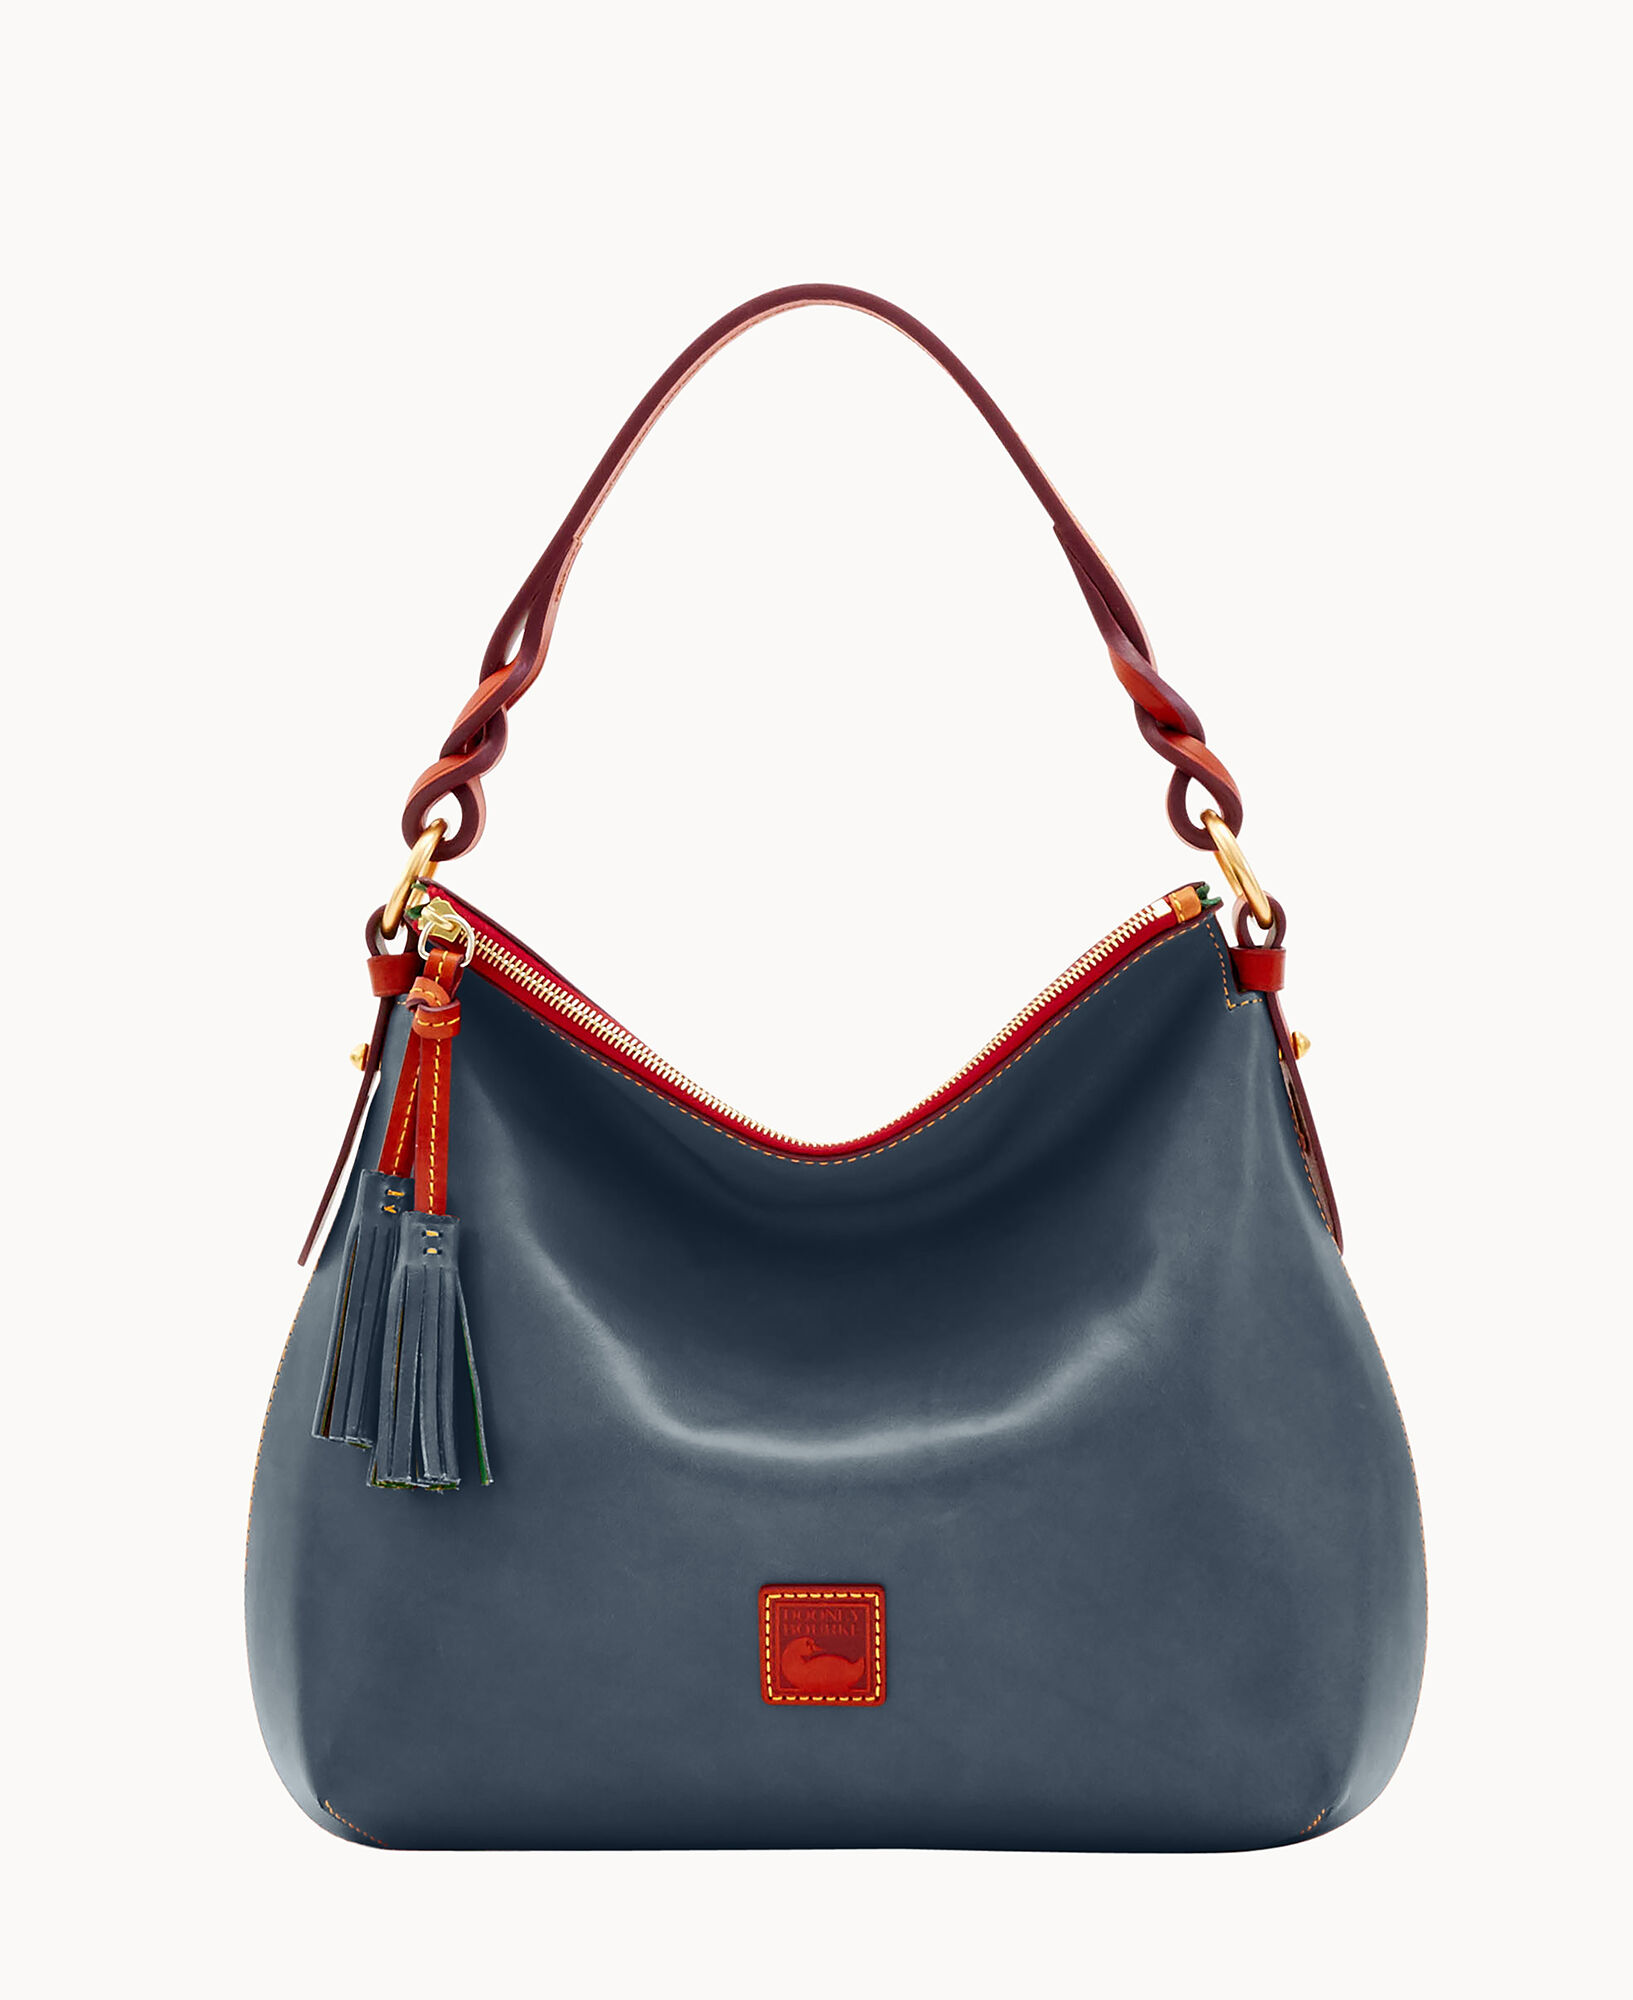 Dooney & Bourke Purse - clothing & accessories - by owner